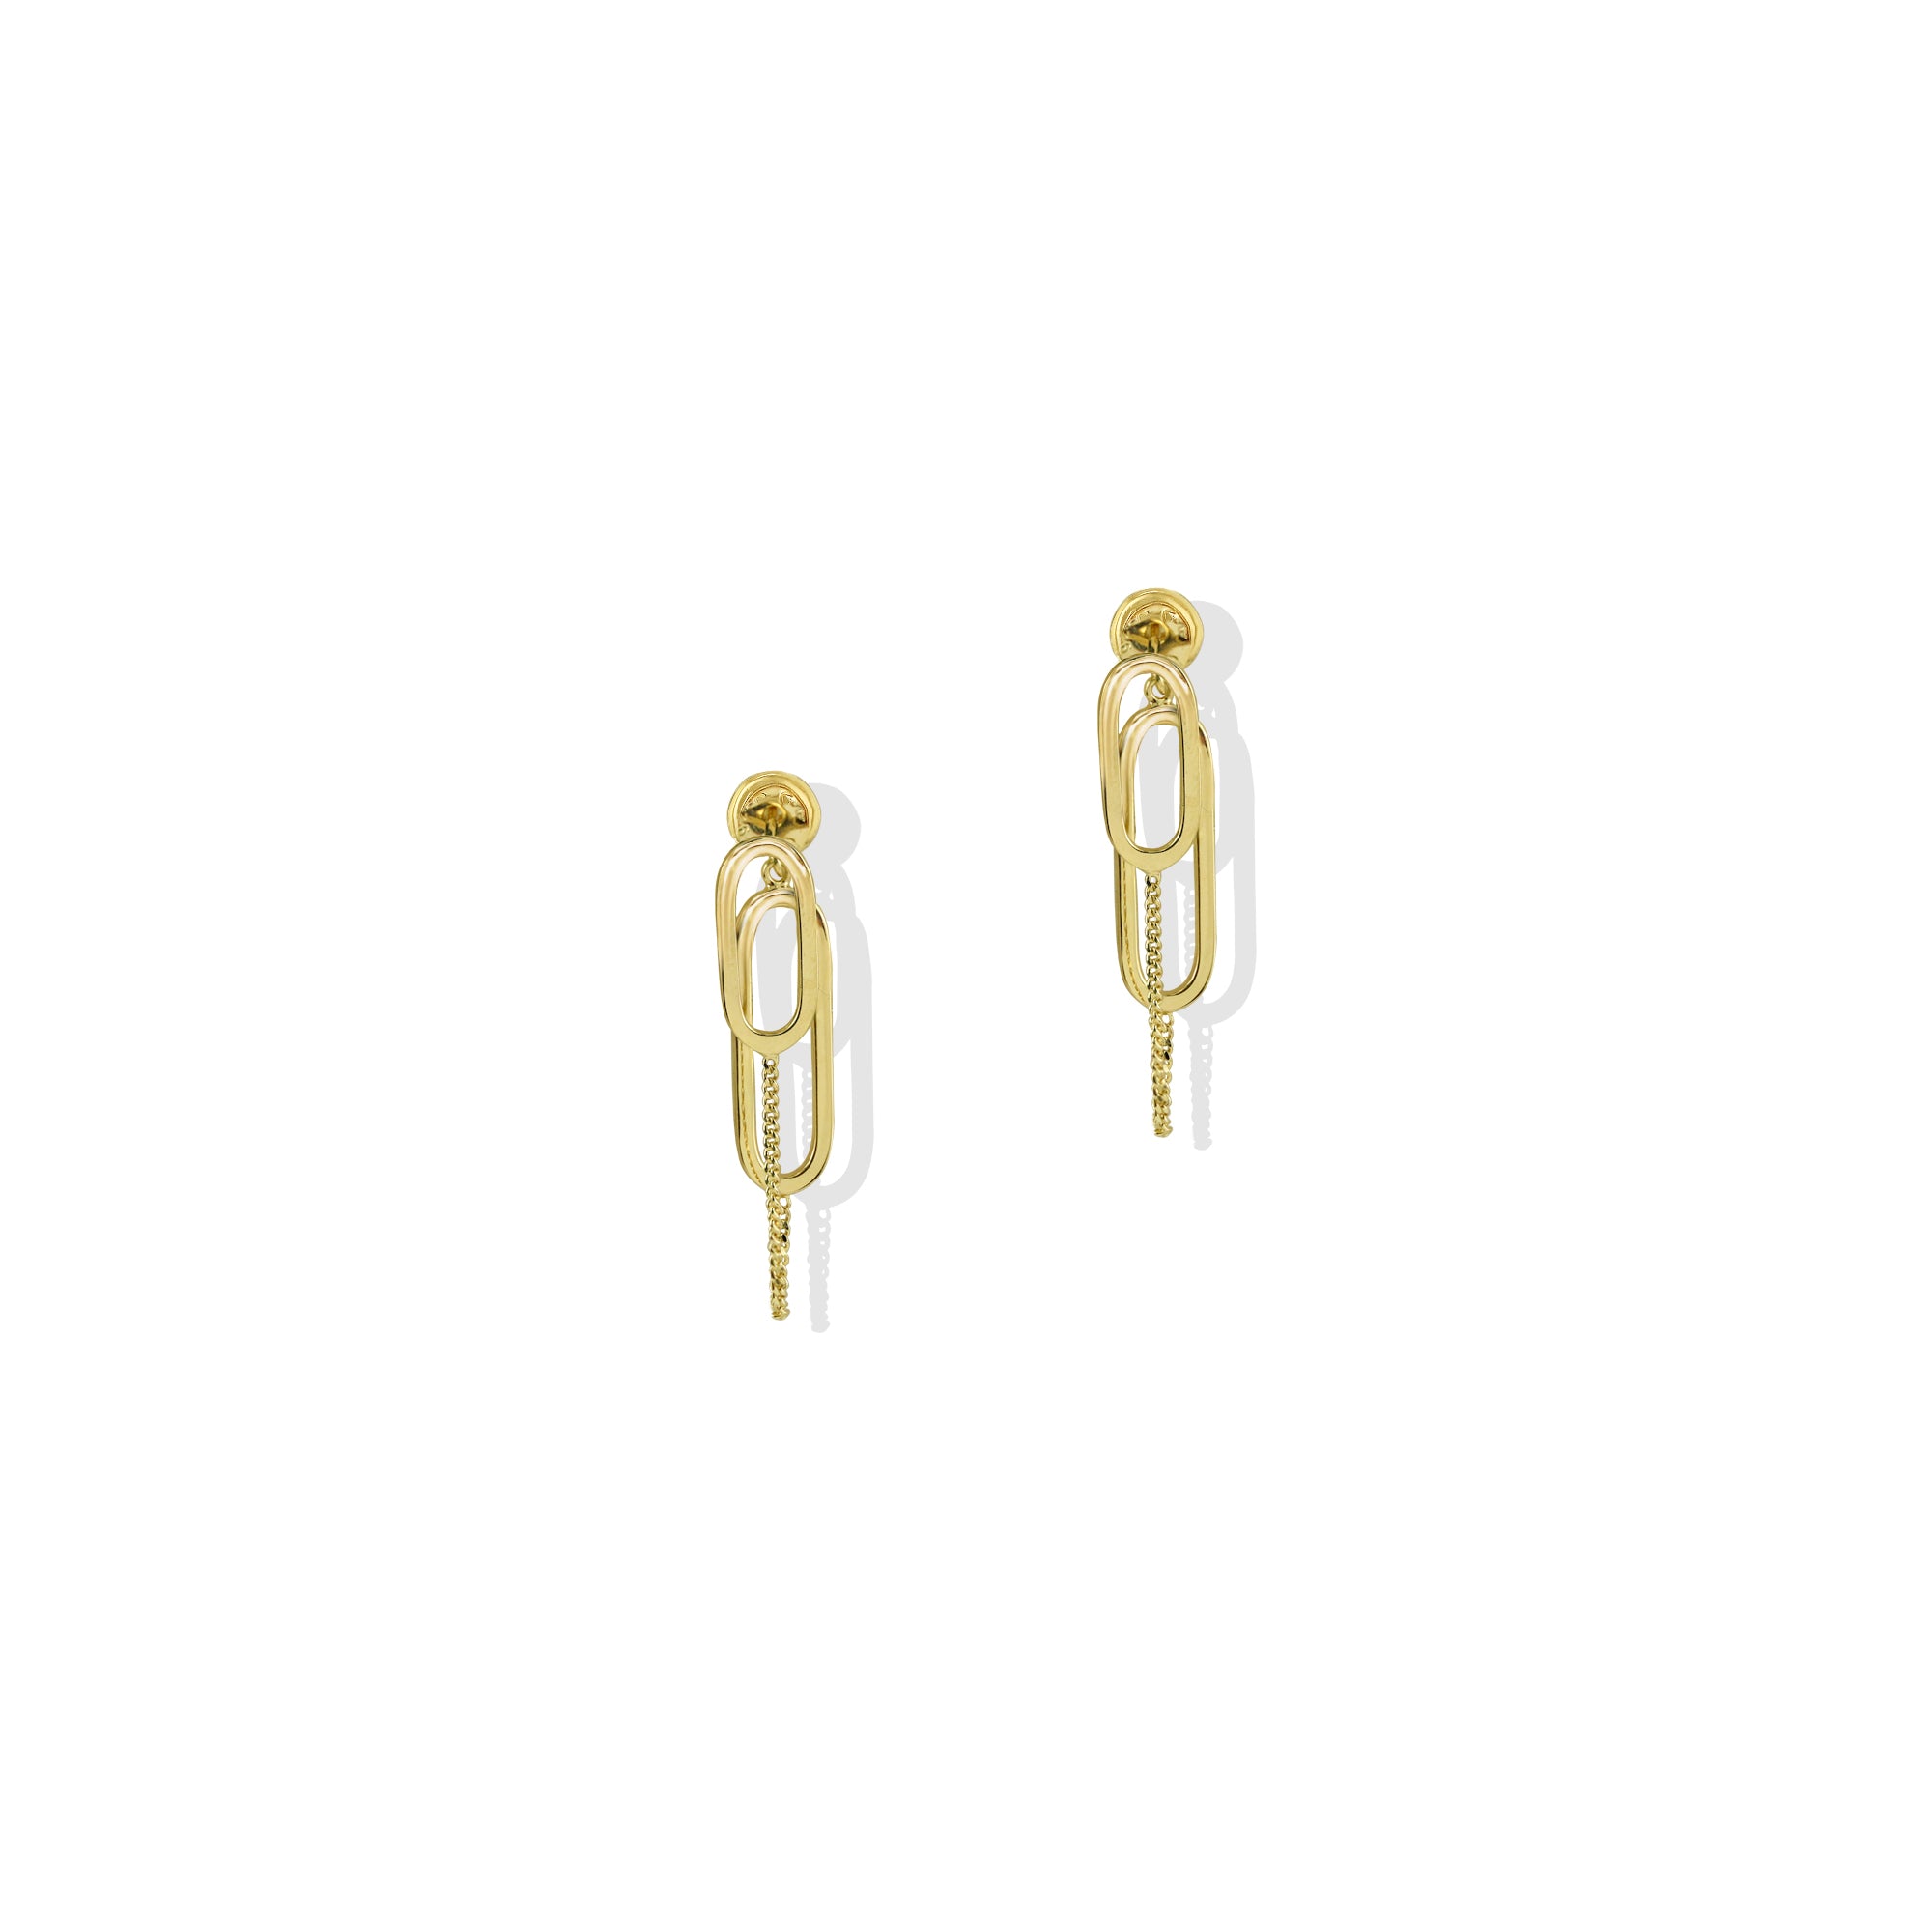 THE CHAINED PAPERCLIP EARRING